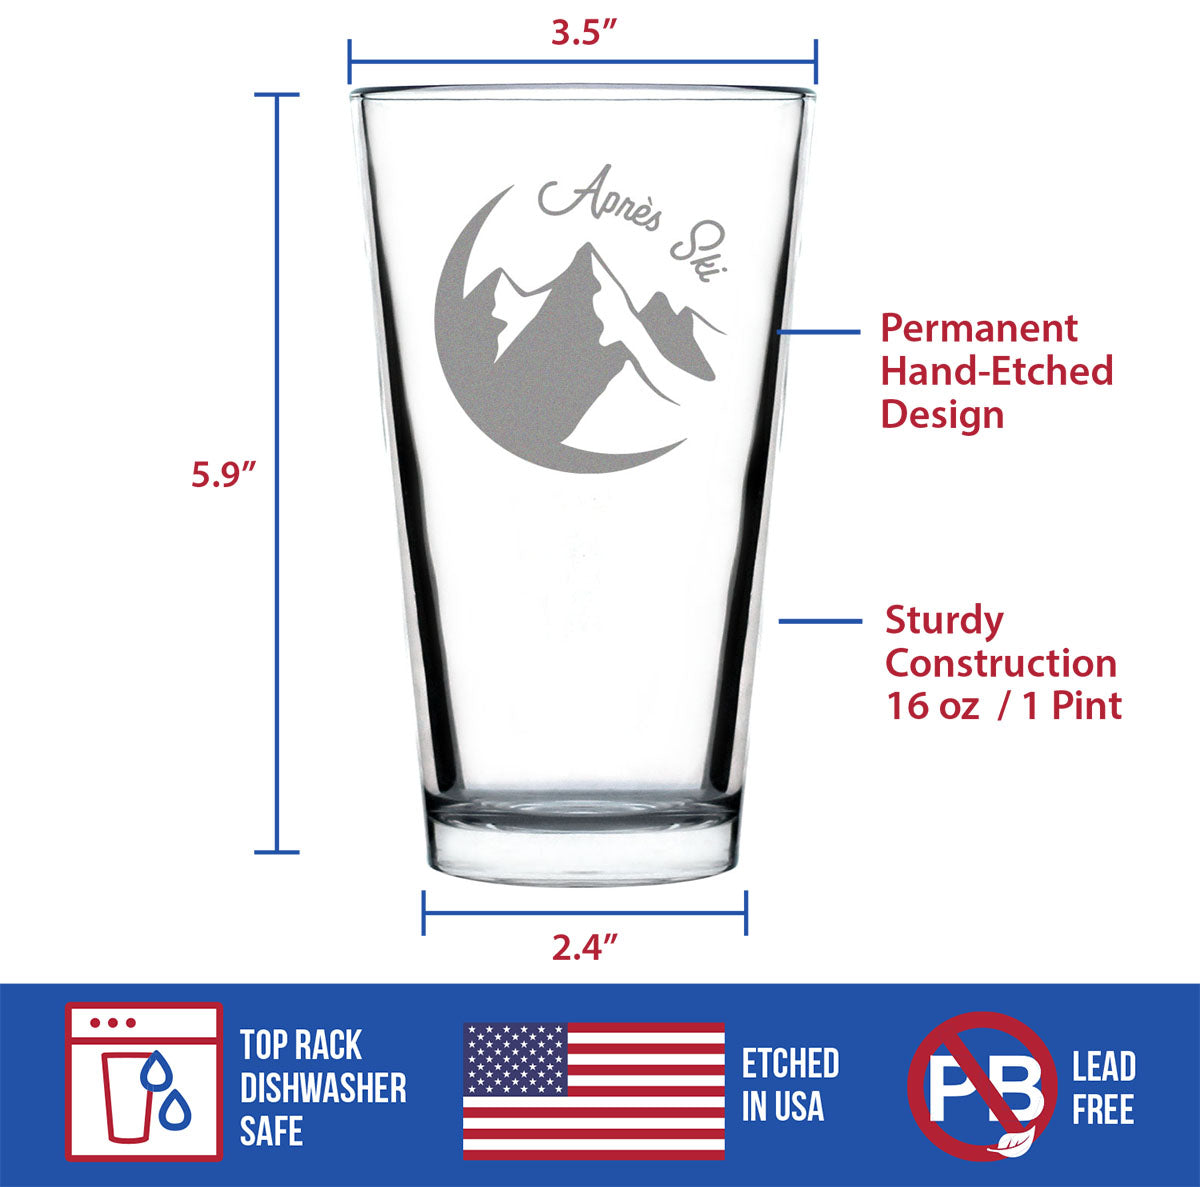 Apres Ski - Pint Glass for Beer - Unique Skiing Themed Decor and Gifts for Mountain Lovers - 16 oz Glasses